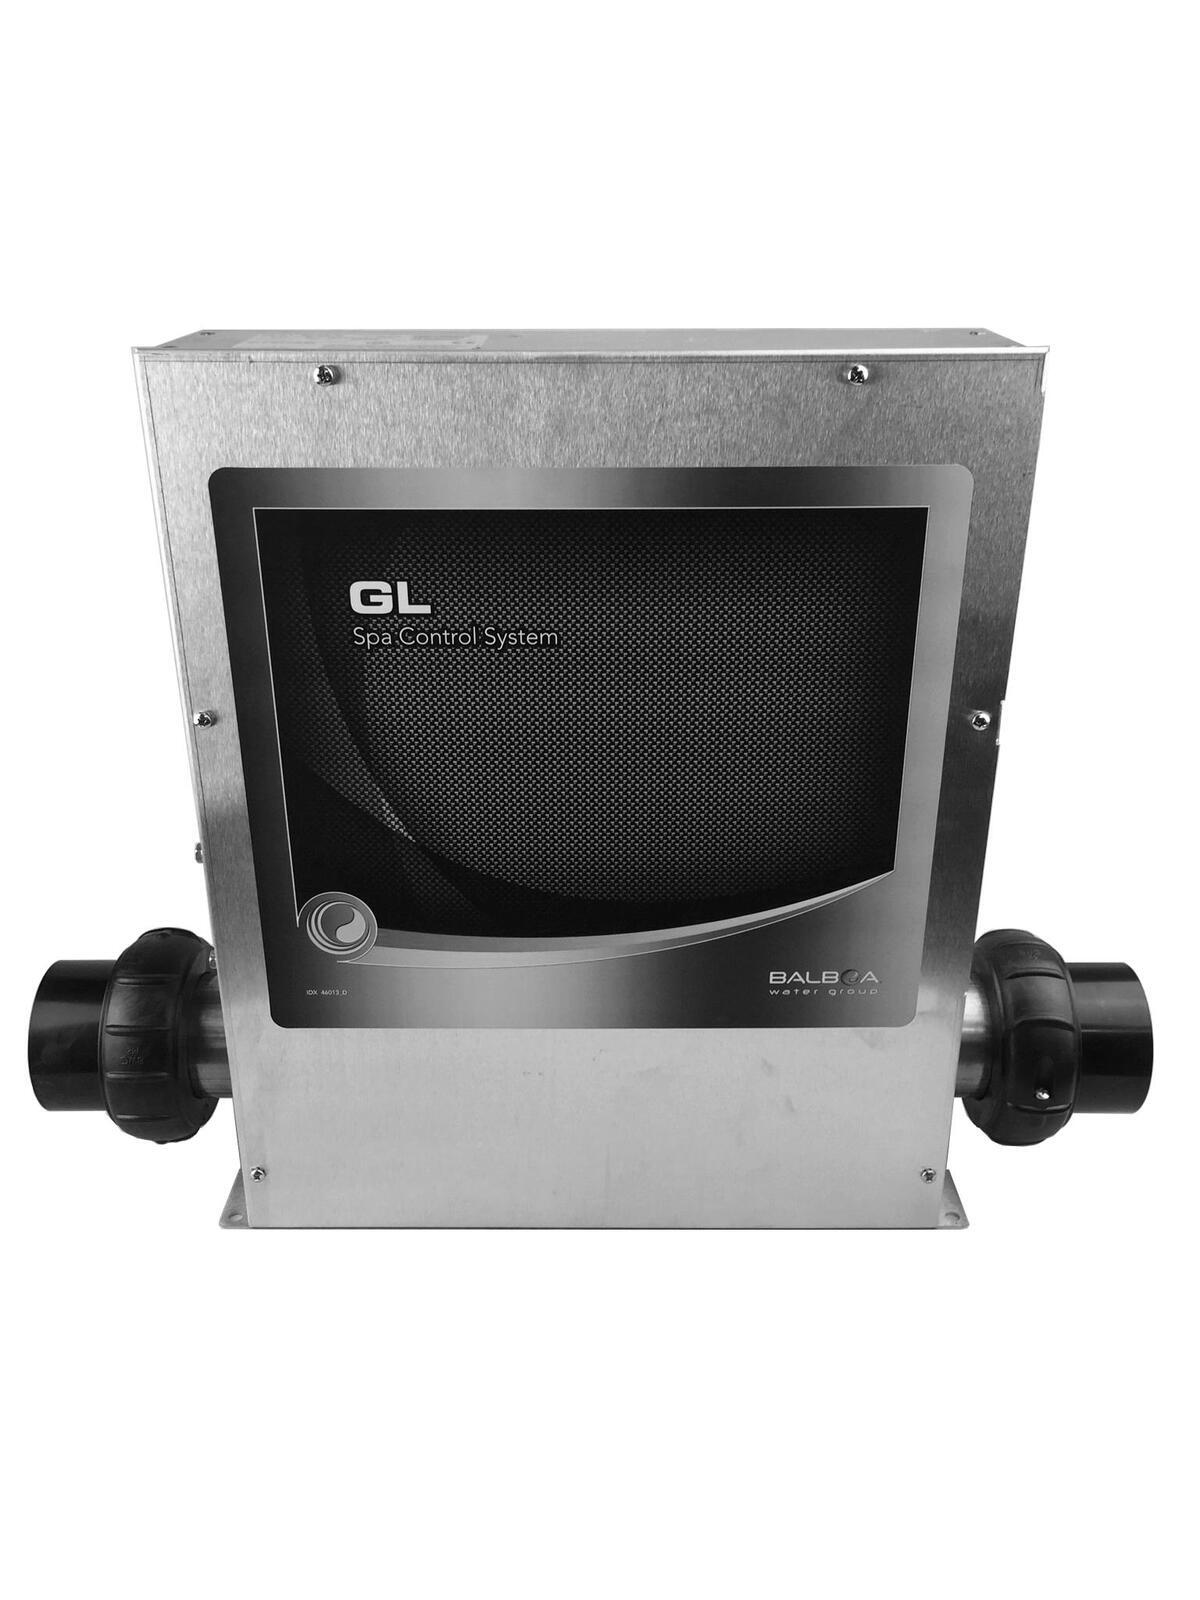 Balboa GL8000 Spa Controller 3kw - Efficient, Reliable & High Performance